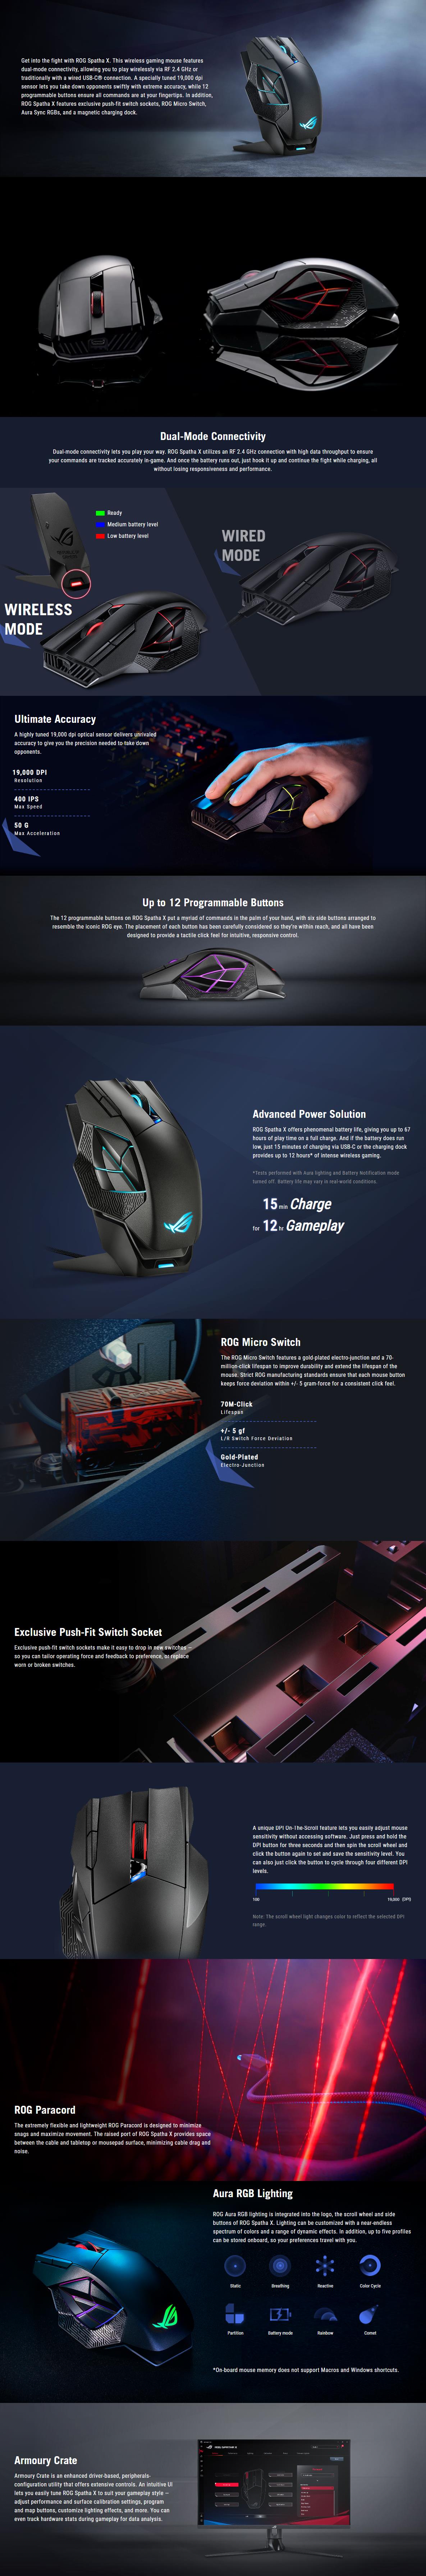 A large marketing image providing additional information about the product ASUS ROG Spatha X Wireless Gaming Mouse - Additional alt info not provided